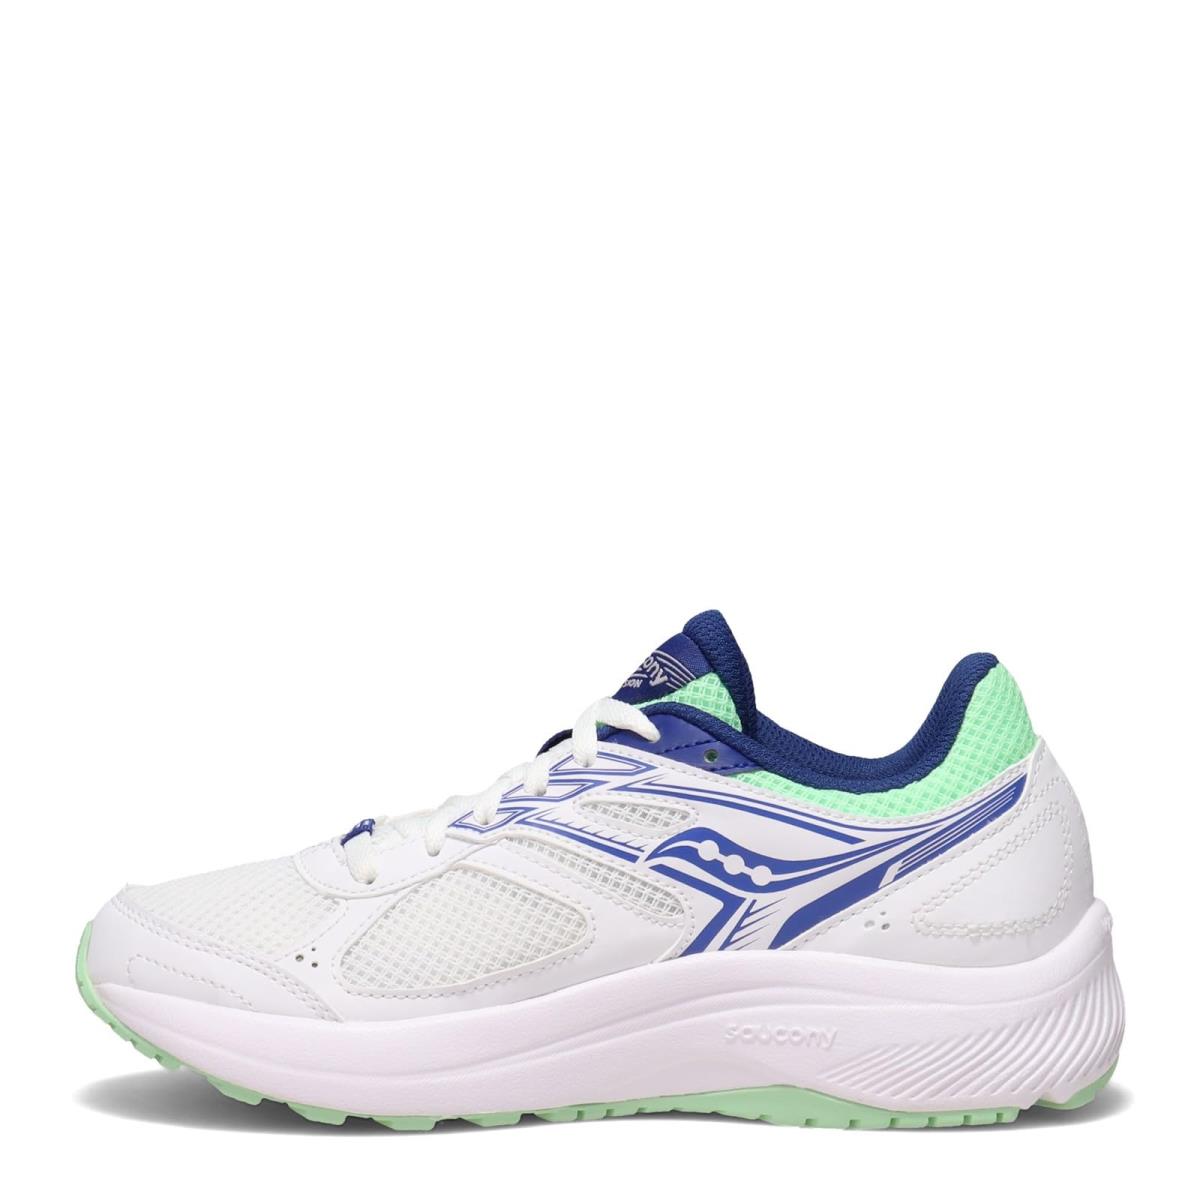 Saucony Women`s Cohesion 14 Road Running Shoe White/Navy/Mint